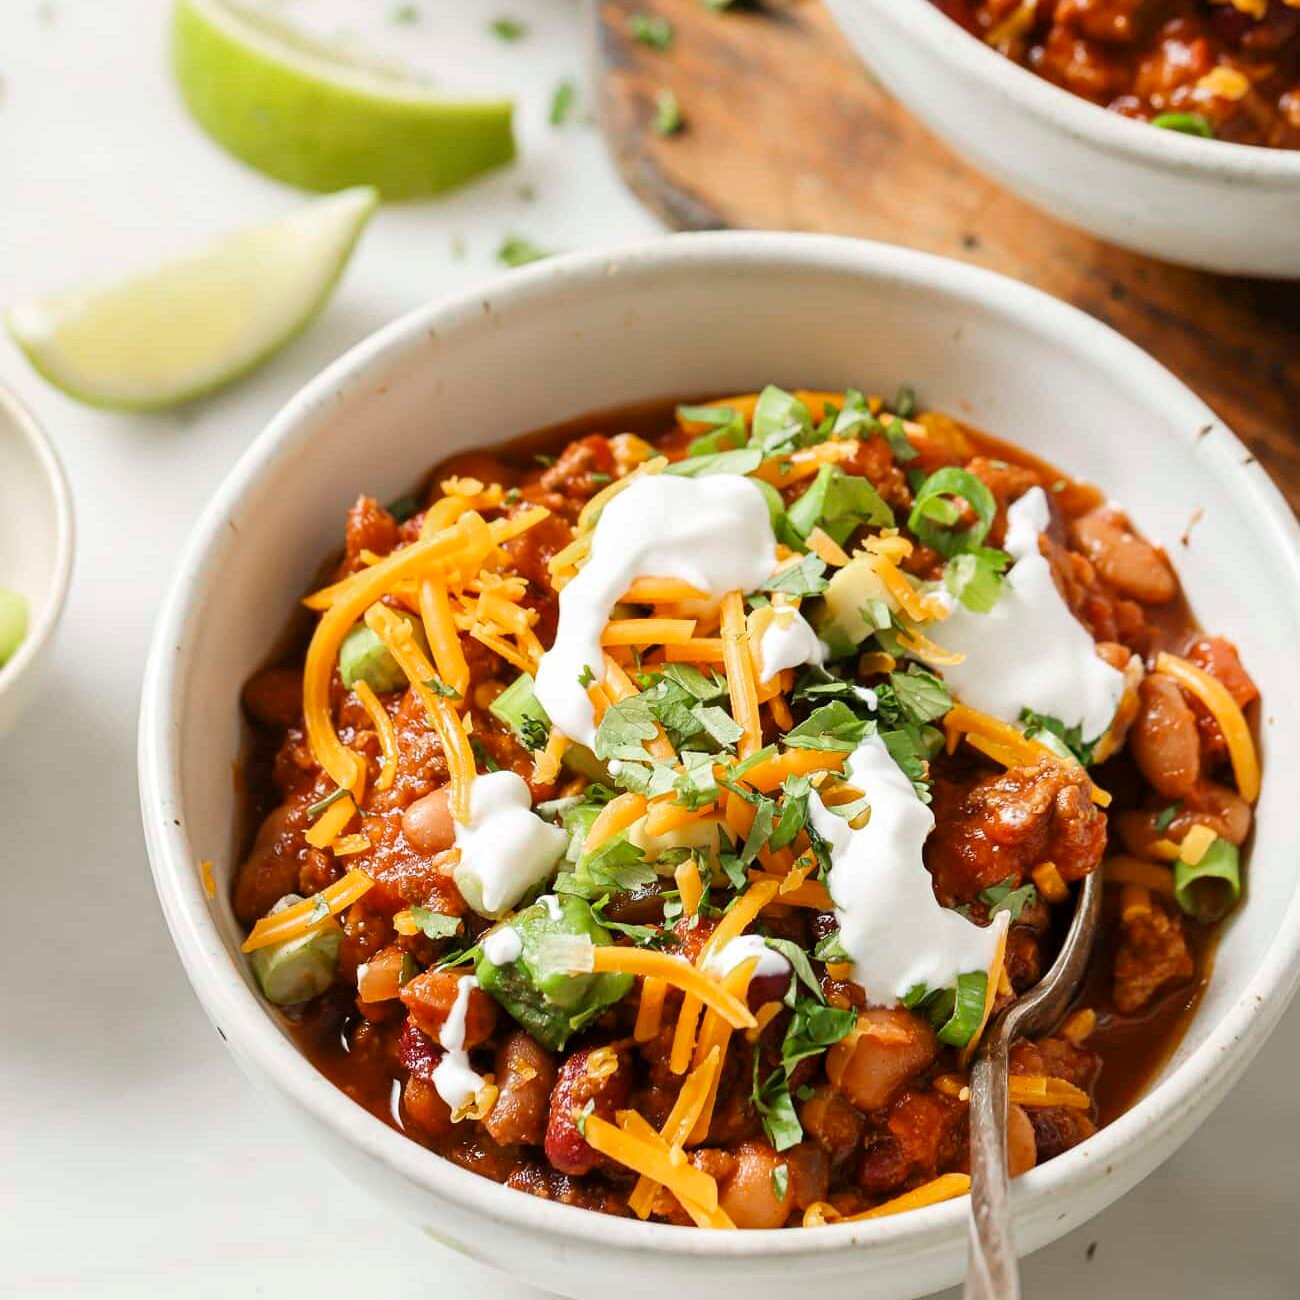 A bowl of slow cooker chili with toppings. One of my favorite date night dinner ideas.